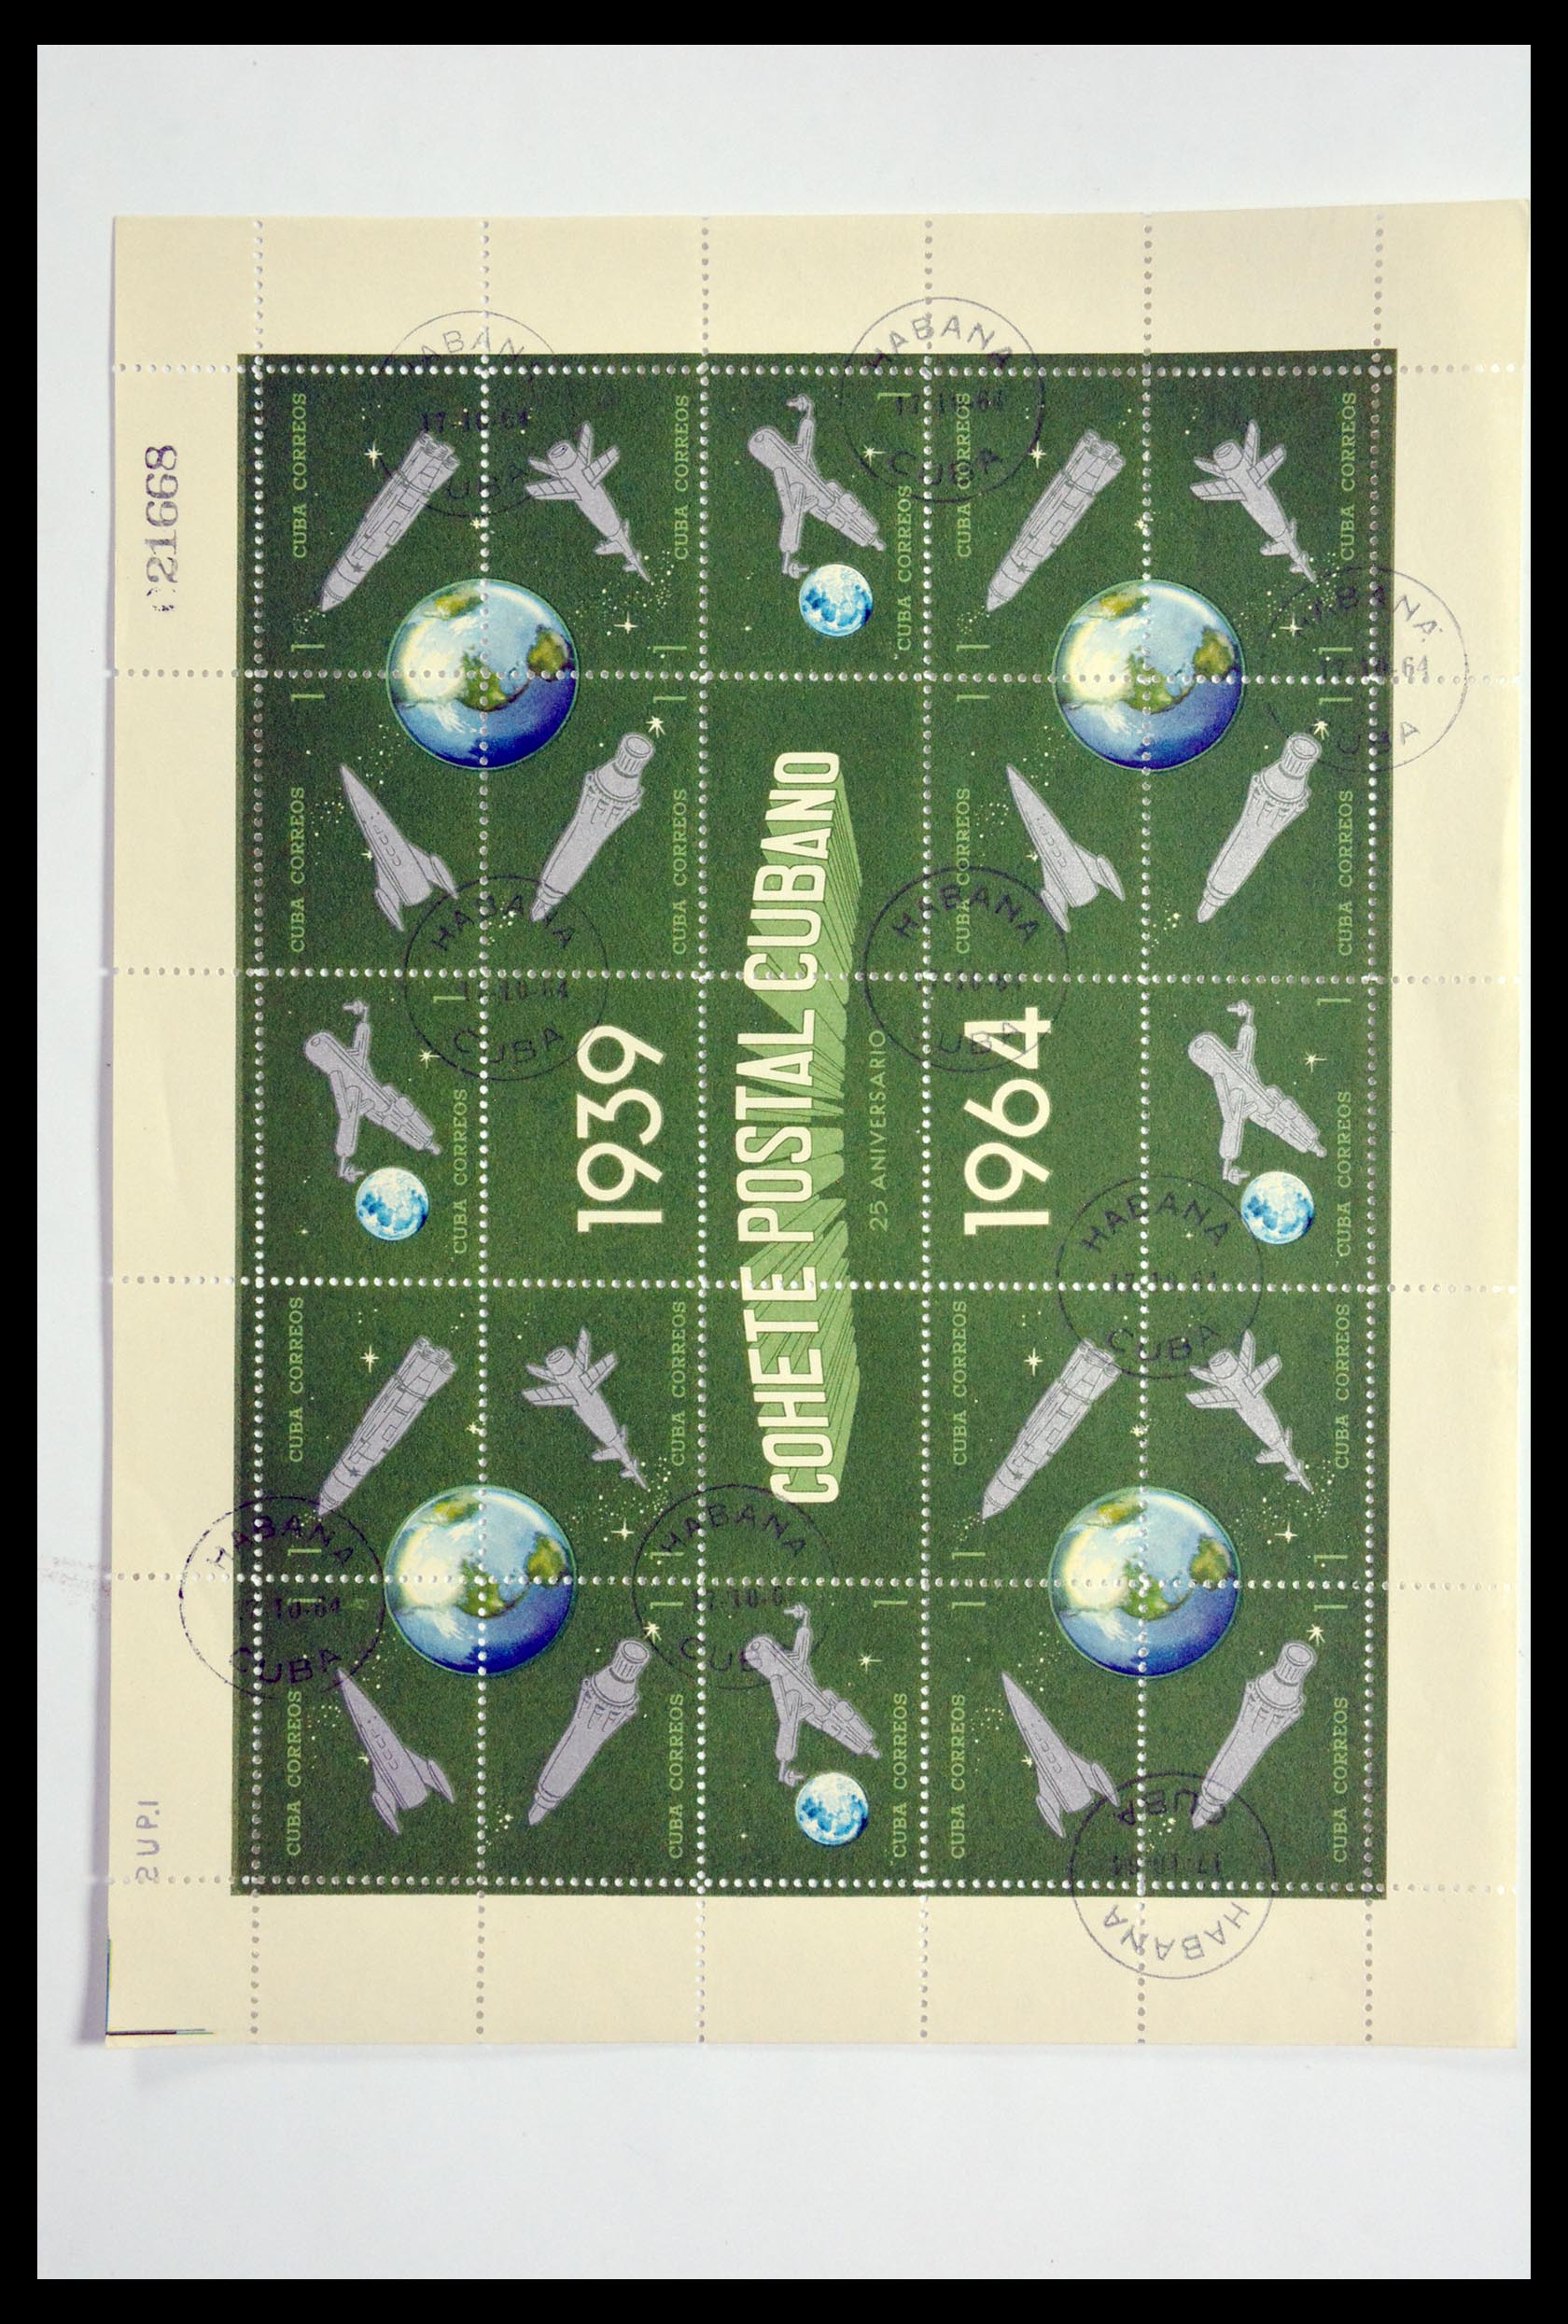 29917 068 - 29917 Latin America airmail stamps.